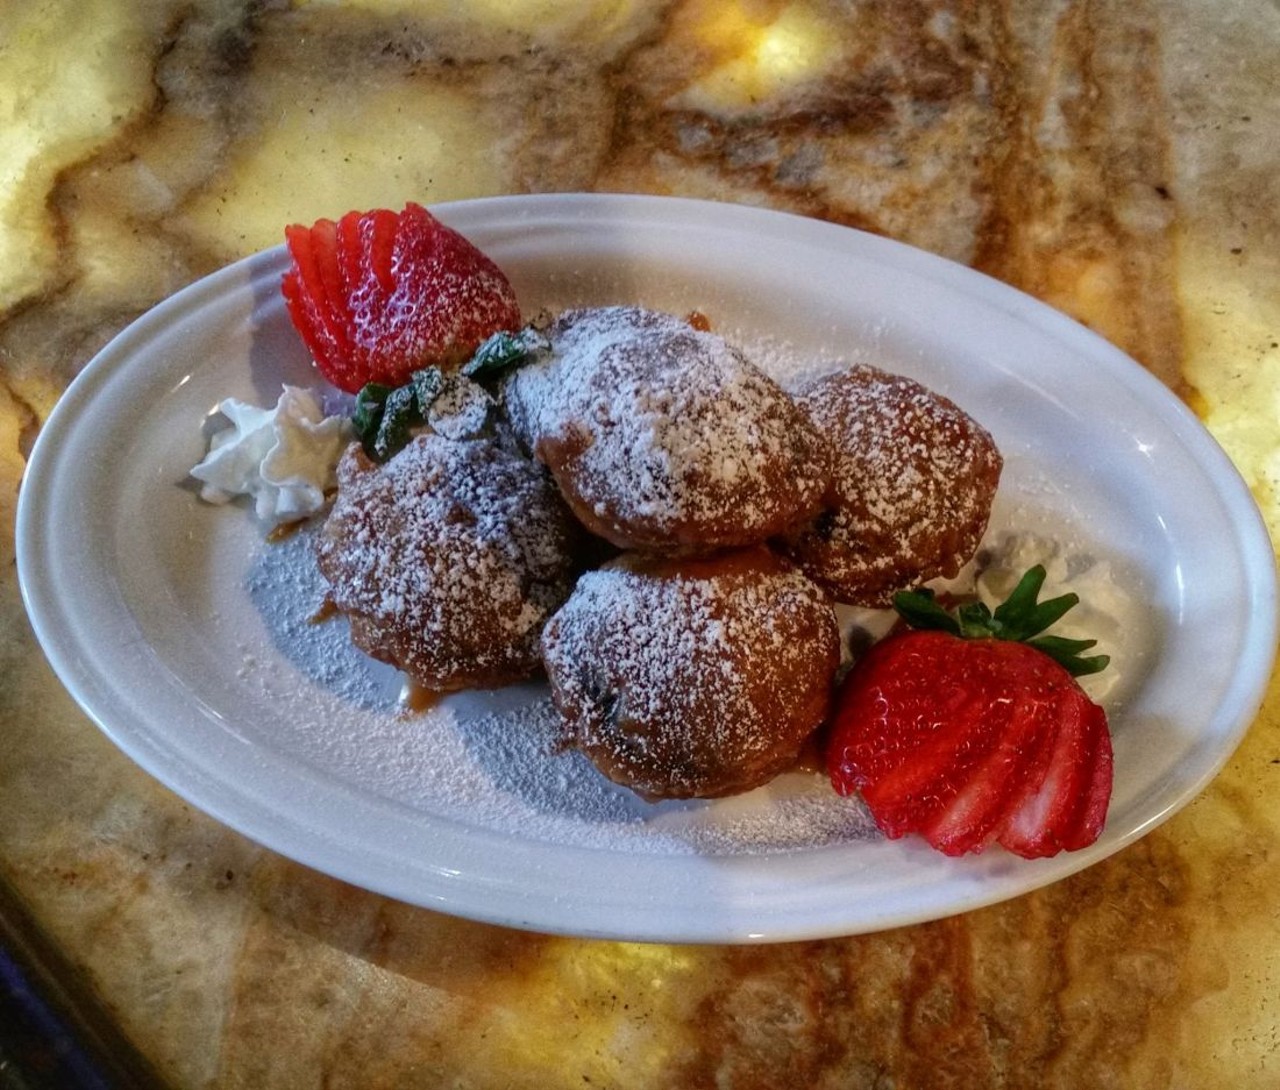 Fried Oreos
Downtown Louie&#146;s
30 Clifford St., Detroit
Get your sweet tooth ready, Downtown Louie&#146;s heard the audience loud and clear and brought fried Oreos to the table. America&#146;s classic cookie, but with an even more American, deep-fried twist. 
Photo via  Downtown Louie&#146;s Lounge / Facebook 